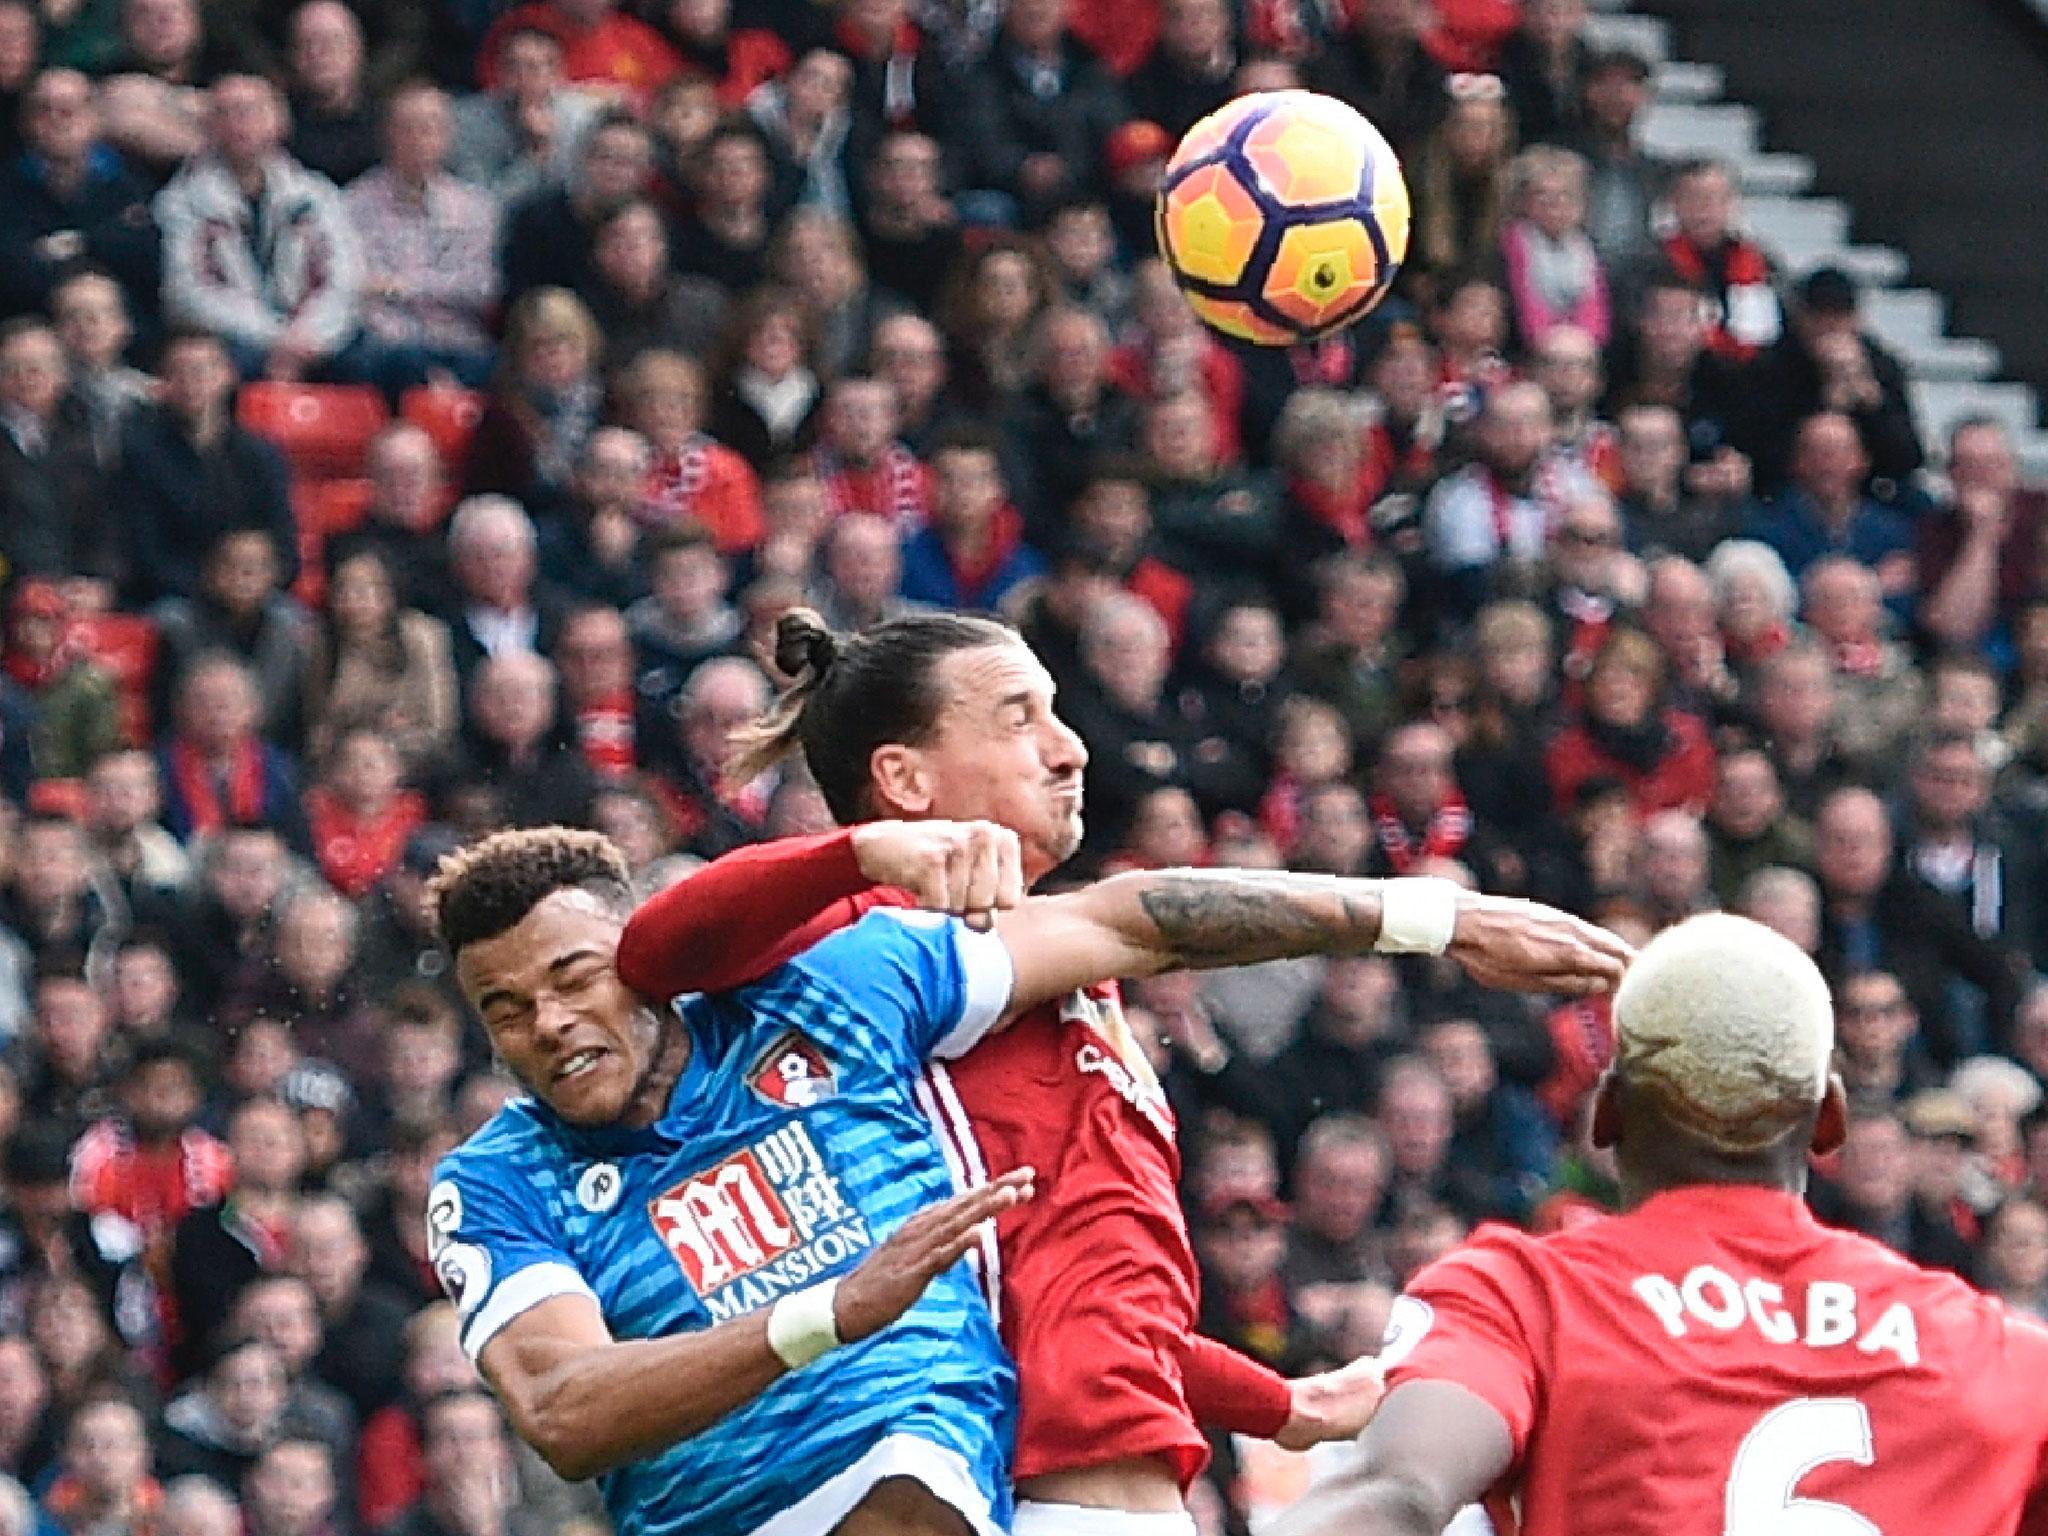 Zlatan Ibrahimovic elbows Tyrone Mings in the head during Manchester United vs Bournemouth